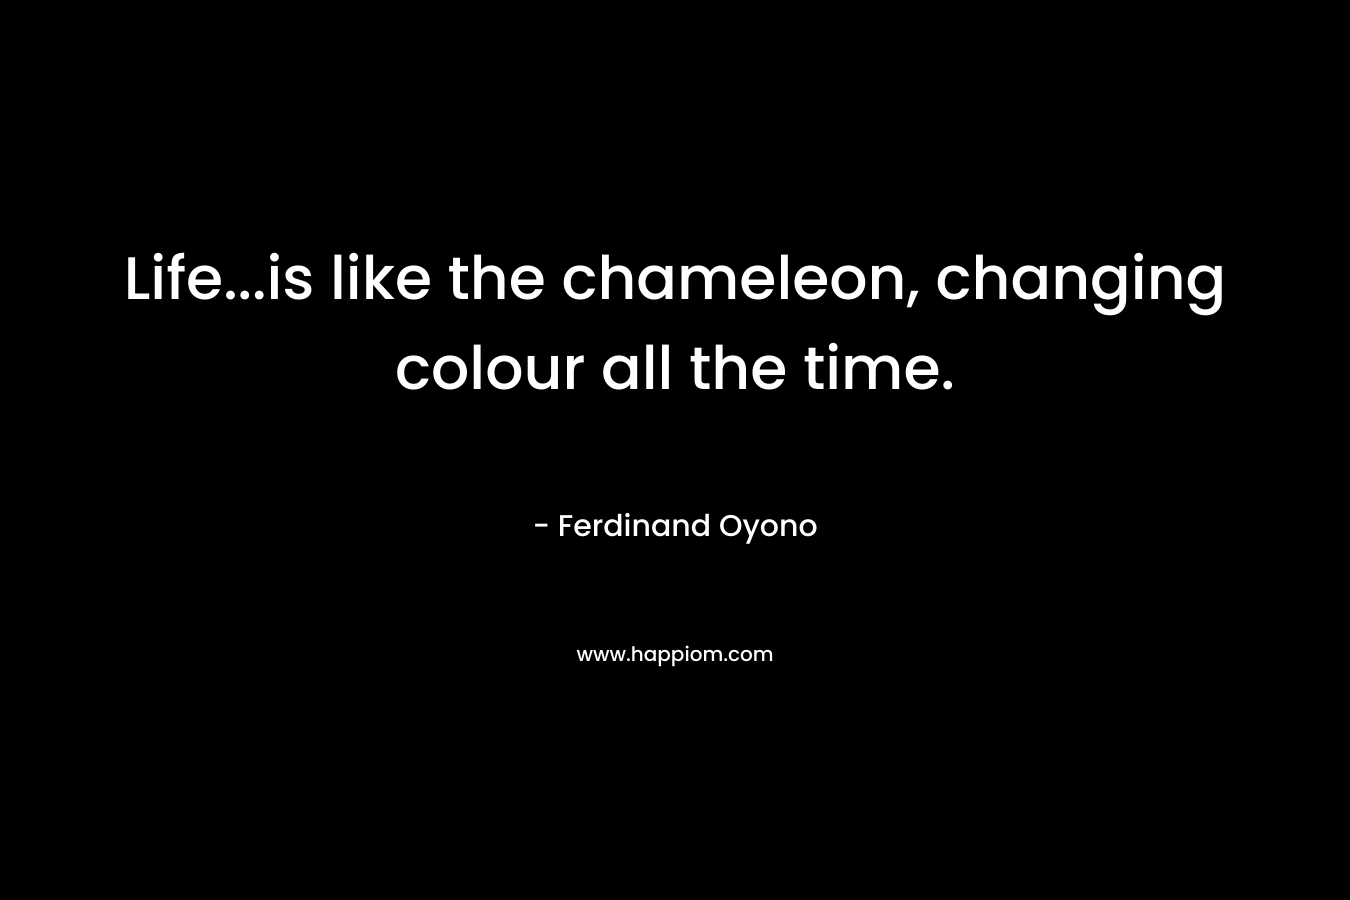 Life...is like the chameleon, changing colour all the time.